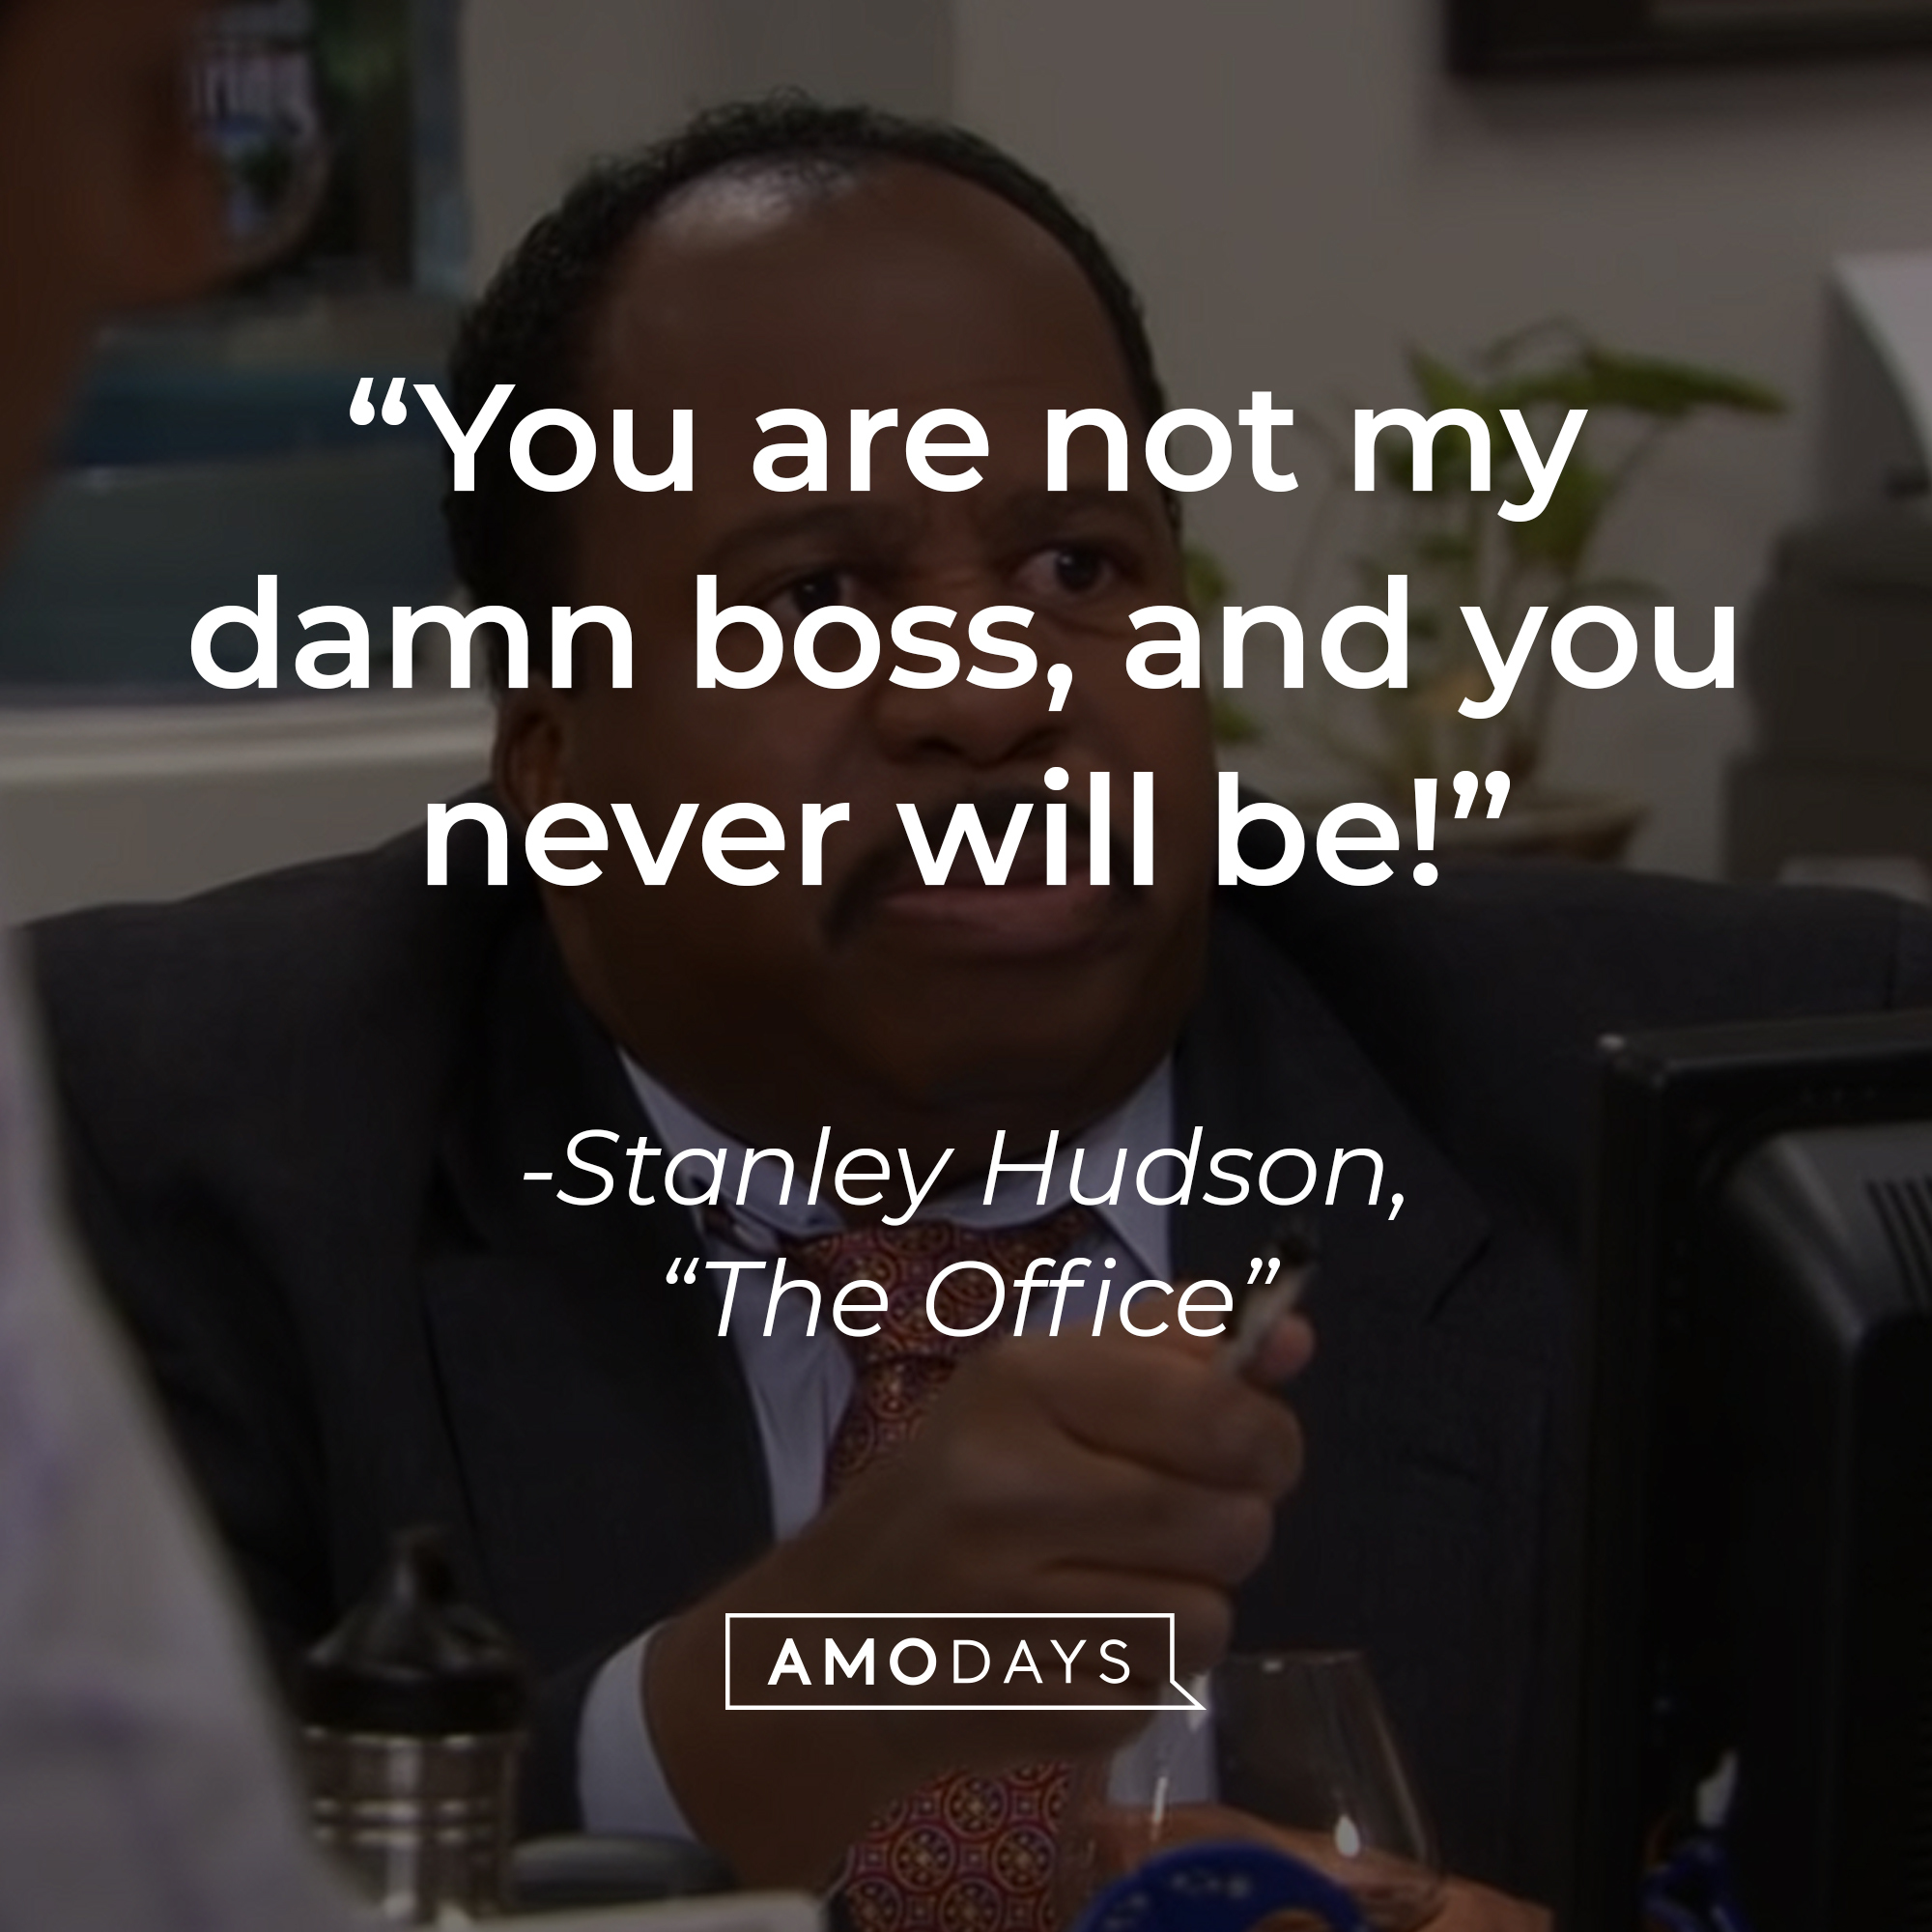 An image of Leslie David Baker as Stanley Hudson in "The Office" with the dialogue: "You are not my damn boss, and you will never be!" | Source: youtube.com/The Office